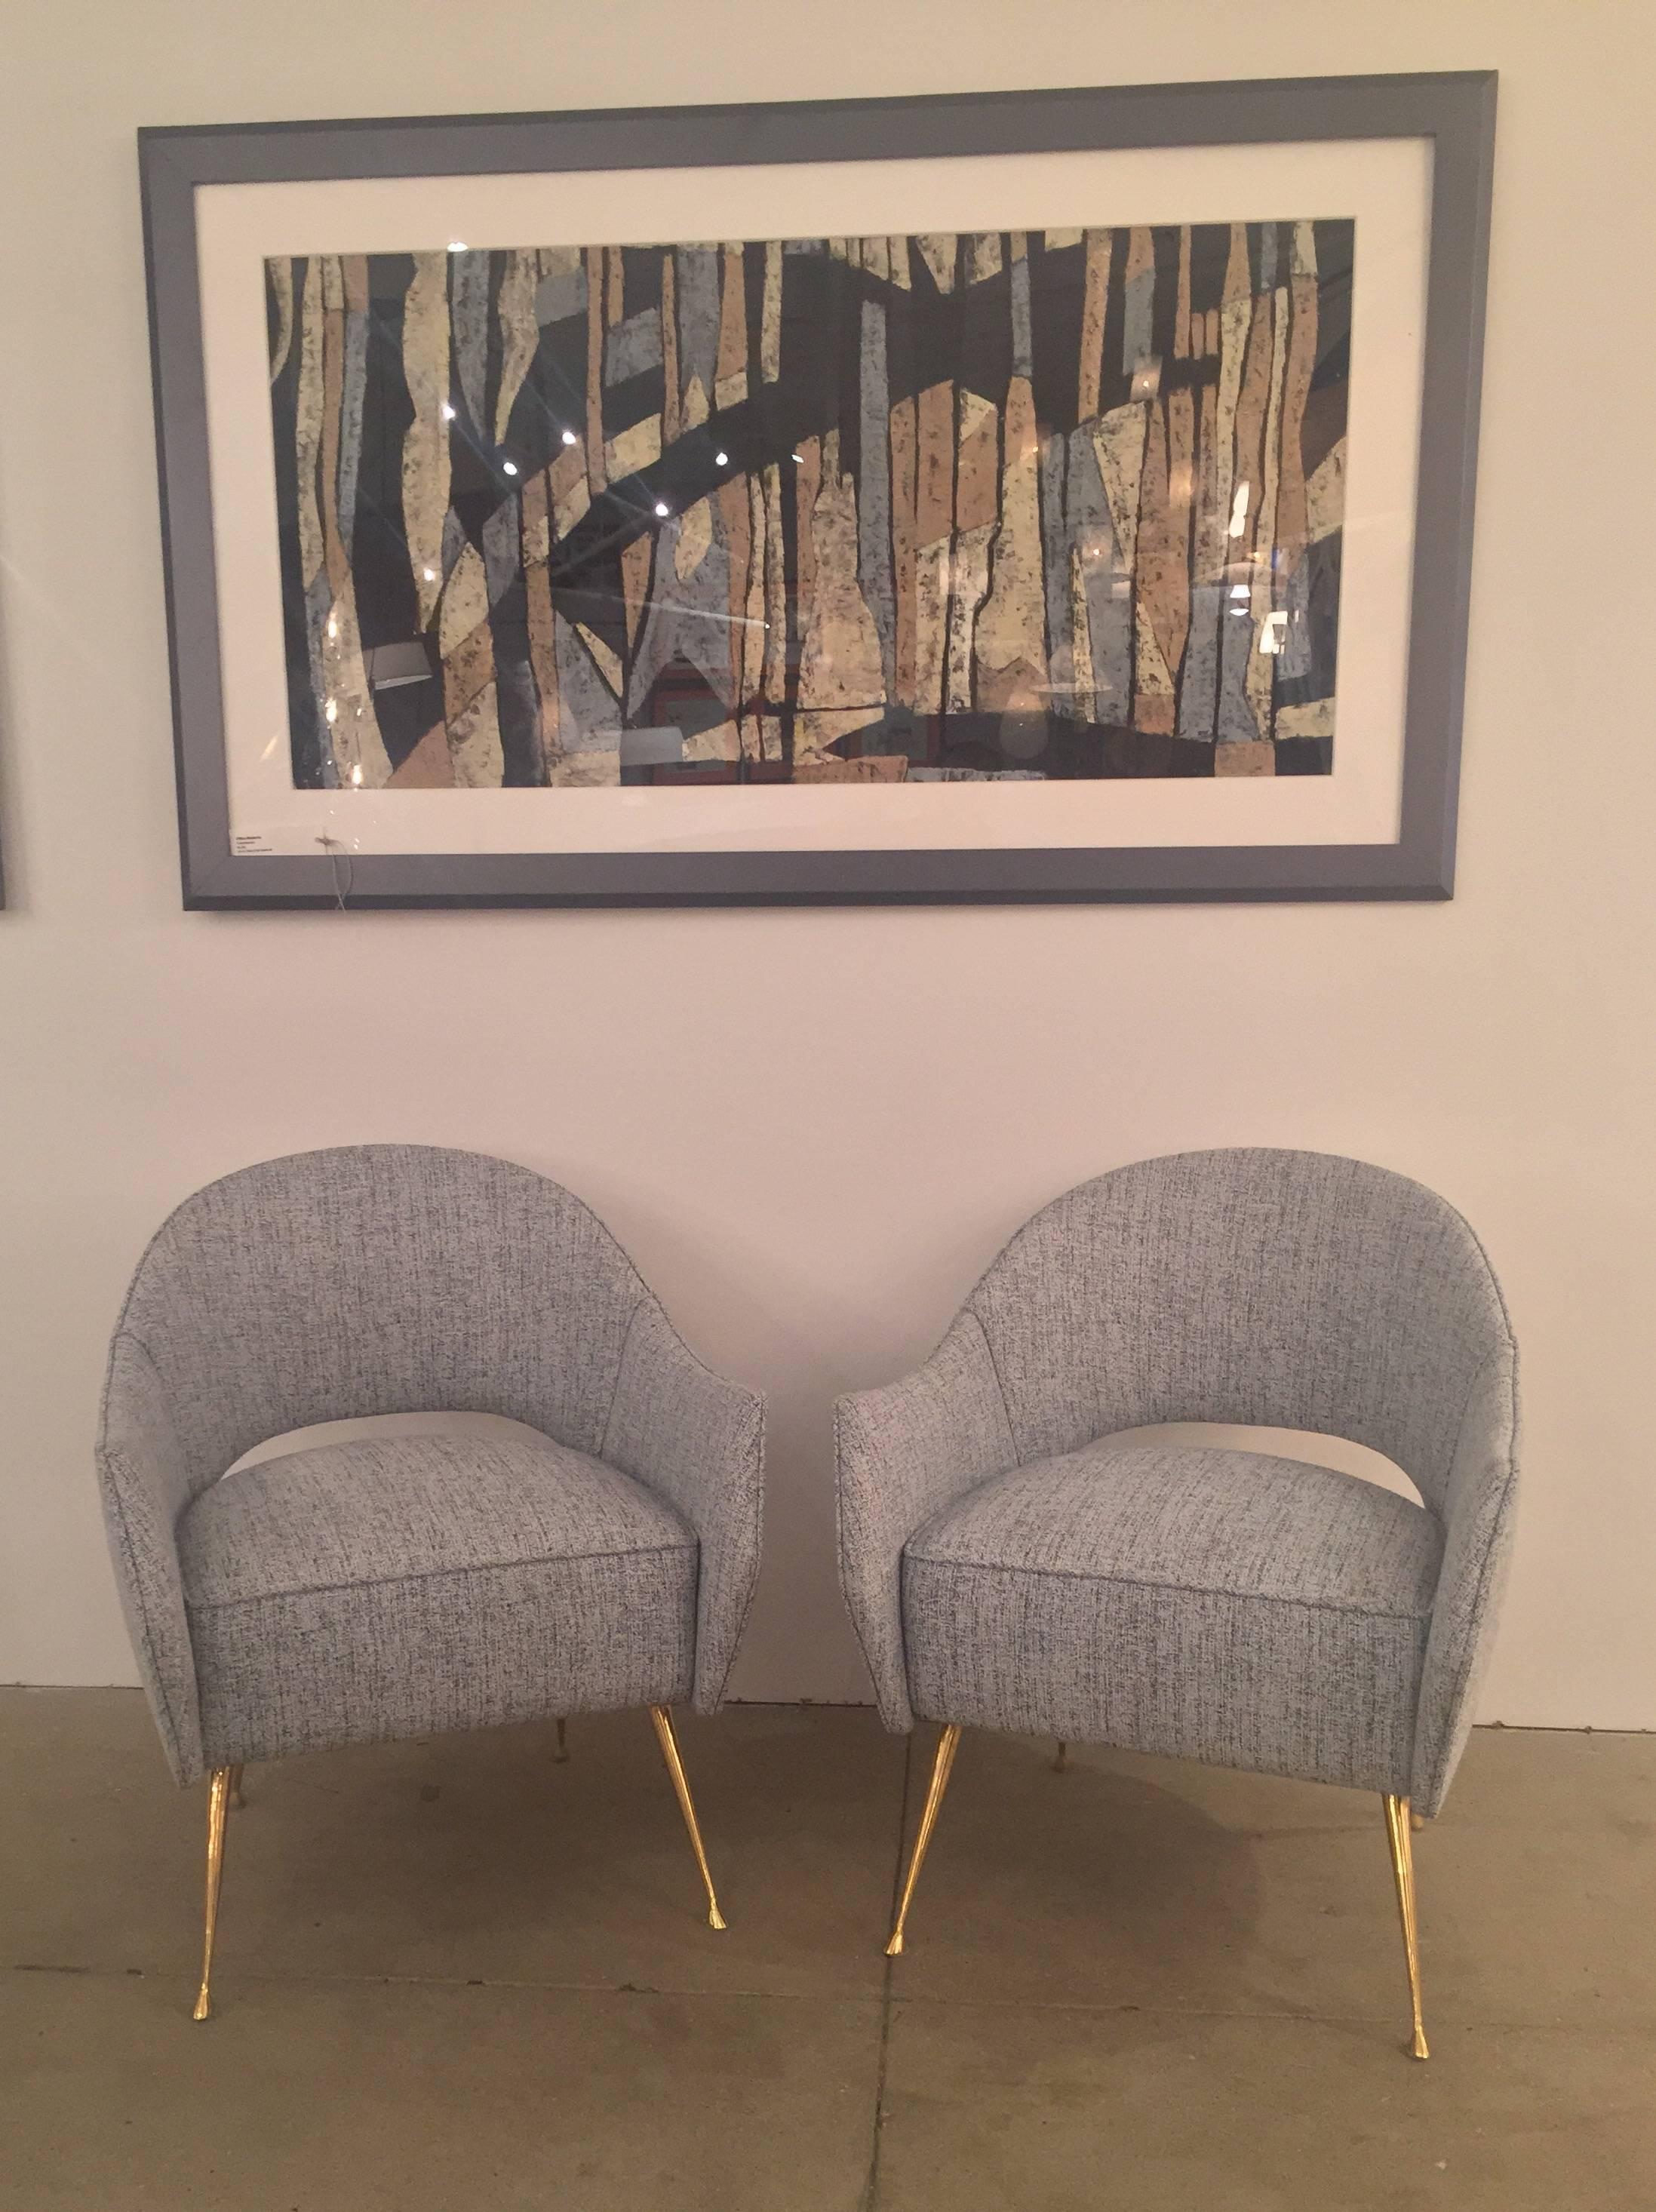 These elegant chairs have cast brass legs and a distinctive curved back. The chair is very comfortable, perfect in size and are ideal as small-scale side chairs.
The beauty of the tapered brass legs with their graceful feet are sure to add that